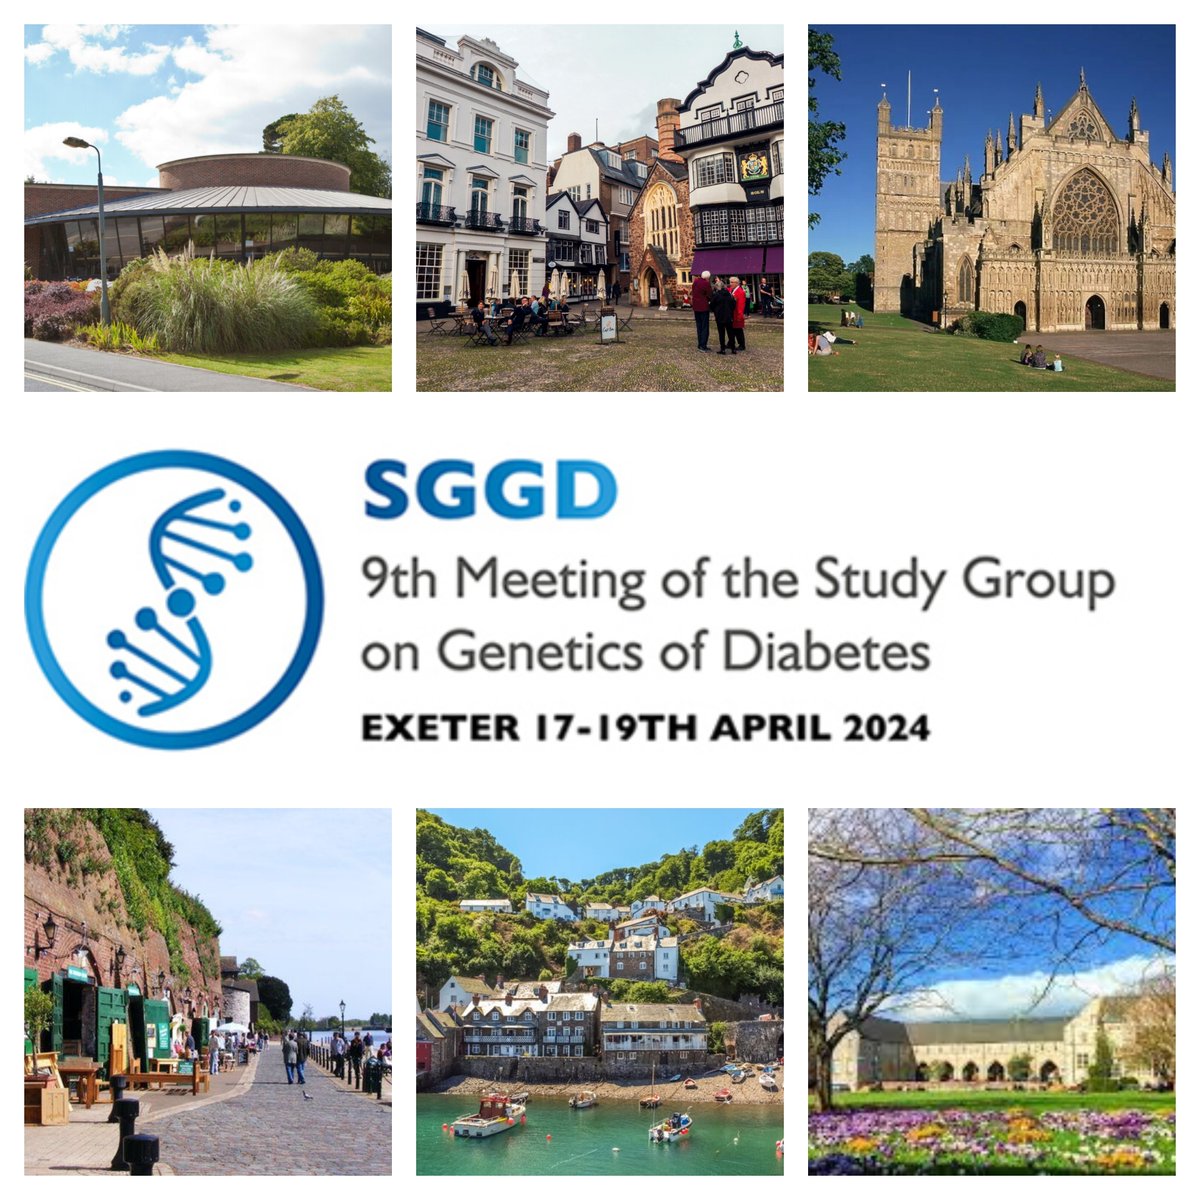 📢 Exciting News! Registration is now OPEN for the 9th Study Group of the Genetics of Diabetes (SGGD) meeting 🗓️ Join us from April 17-19, 2024, in the beautiful city of Exeter. Explore the program and secure your early bird rate here: tinyurl.com/7np6n5x7 #ExeterSGGD24